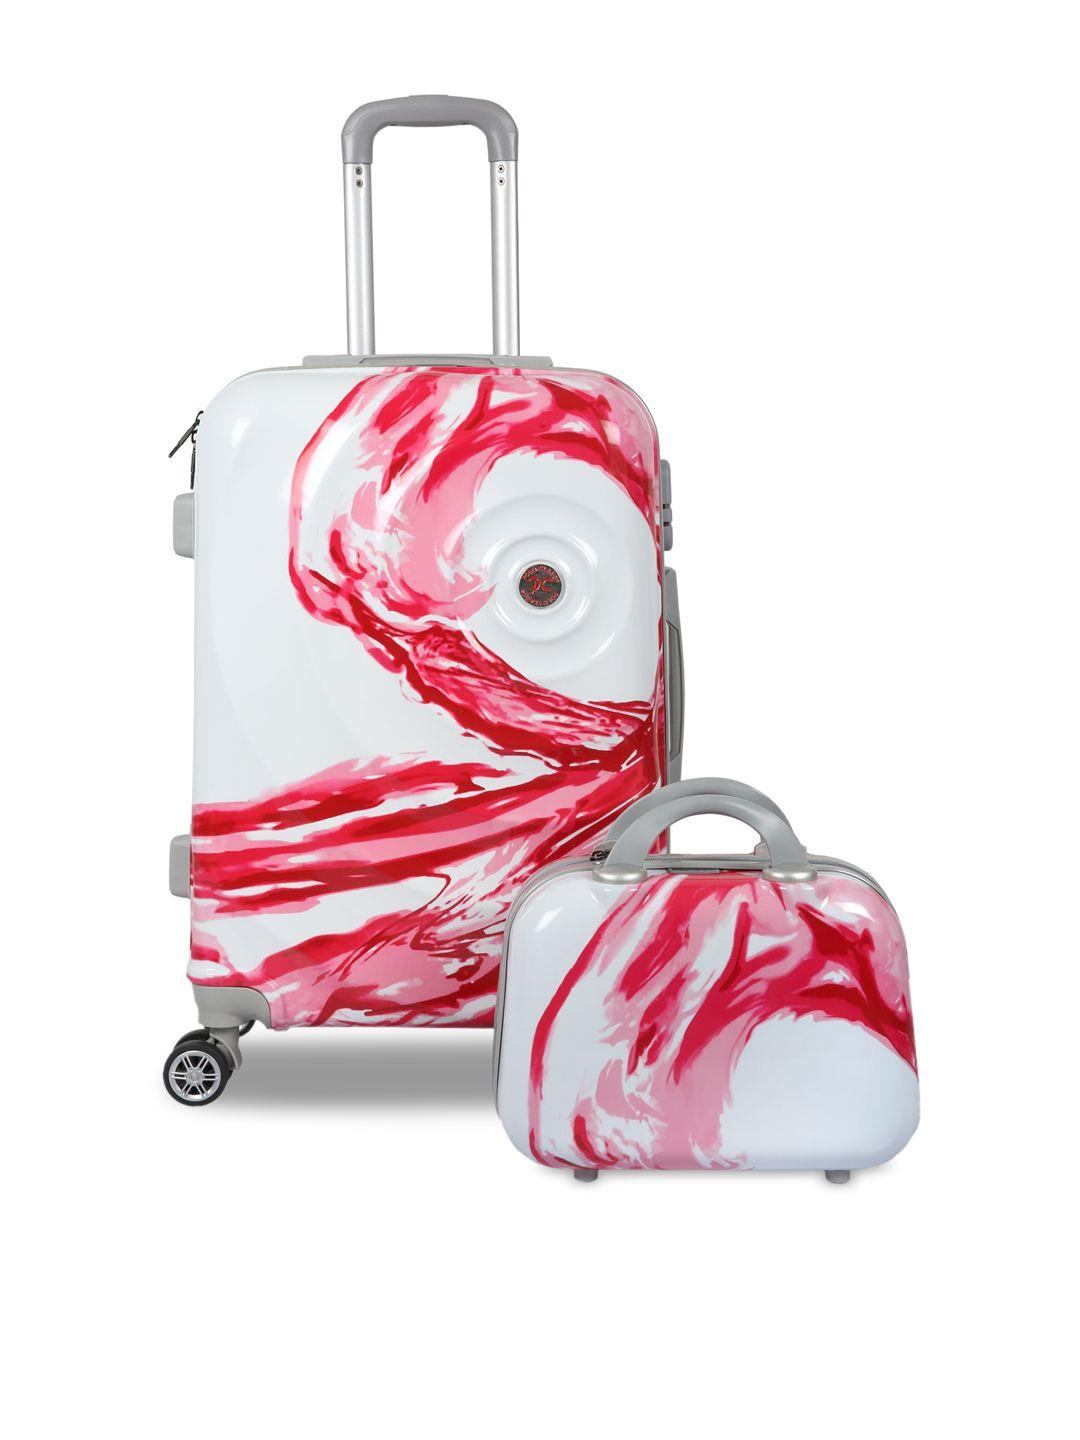 polo class unisex set of 2 red & white printed trolley & vanity bags